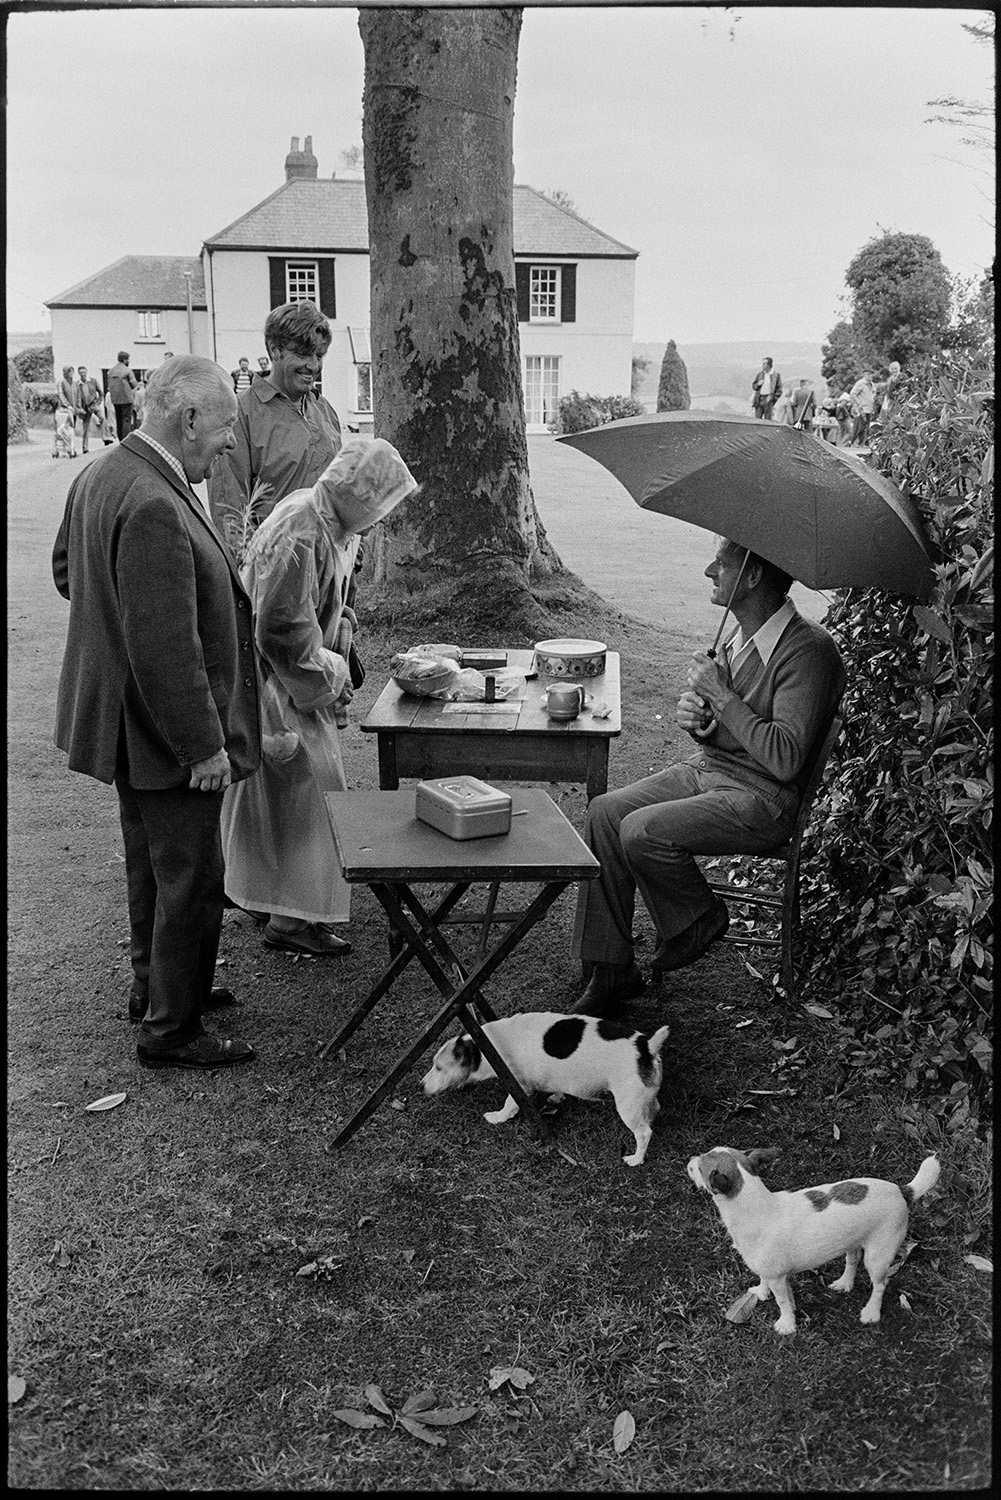 Vicarage fete, stalls, croquet, tea and cakes in rain in garden, dogs. 
[People arriving and having a go on the raffle at the vicarage fete at Merton Rectory. A man with an umbrella and two dogs are at the entrance. The vicarage can be seen in the background.]